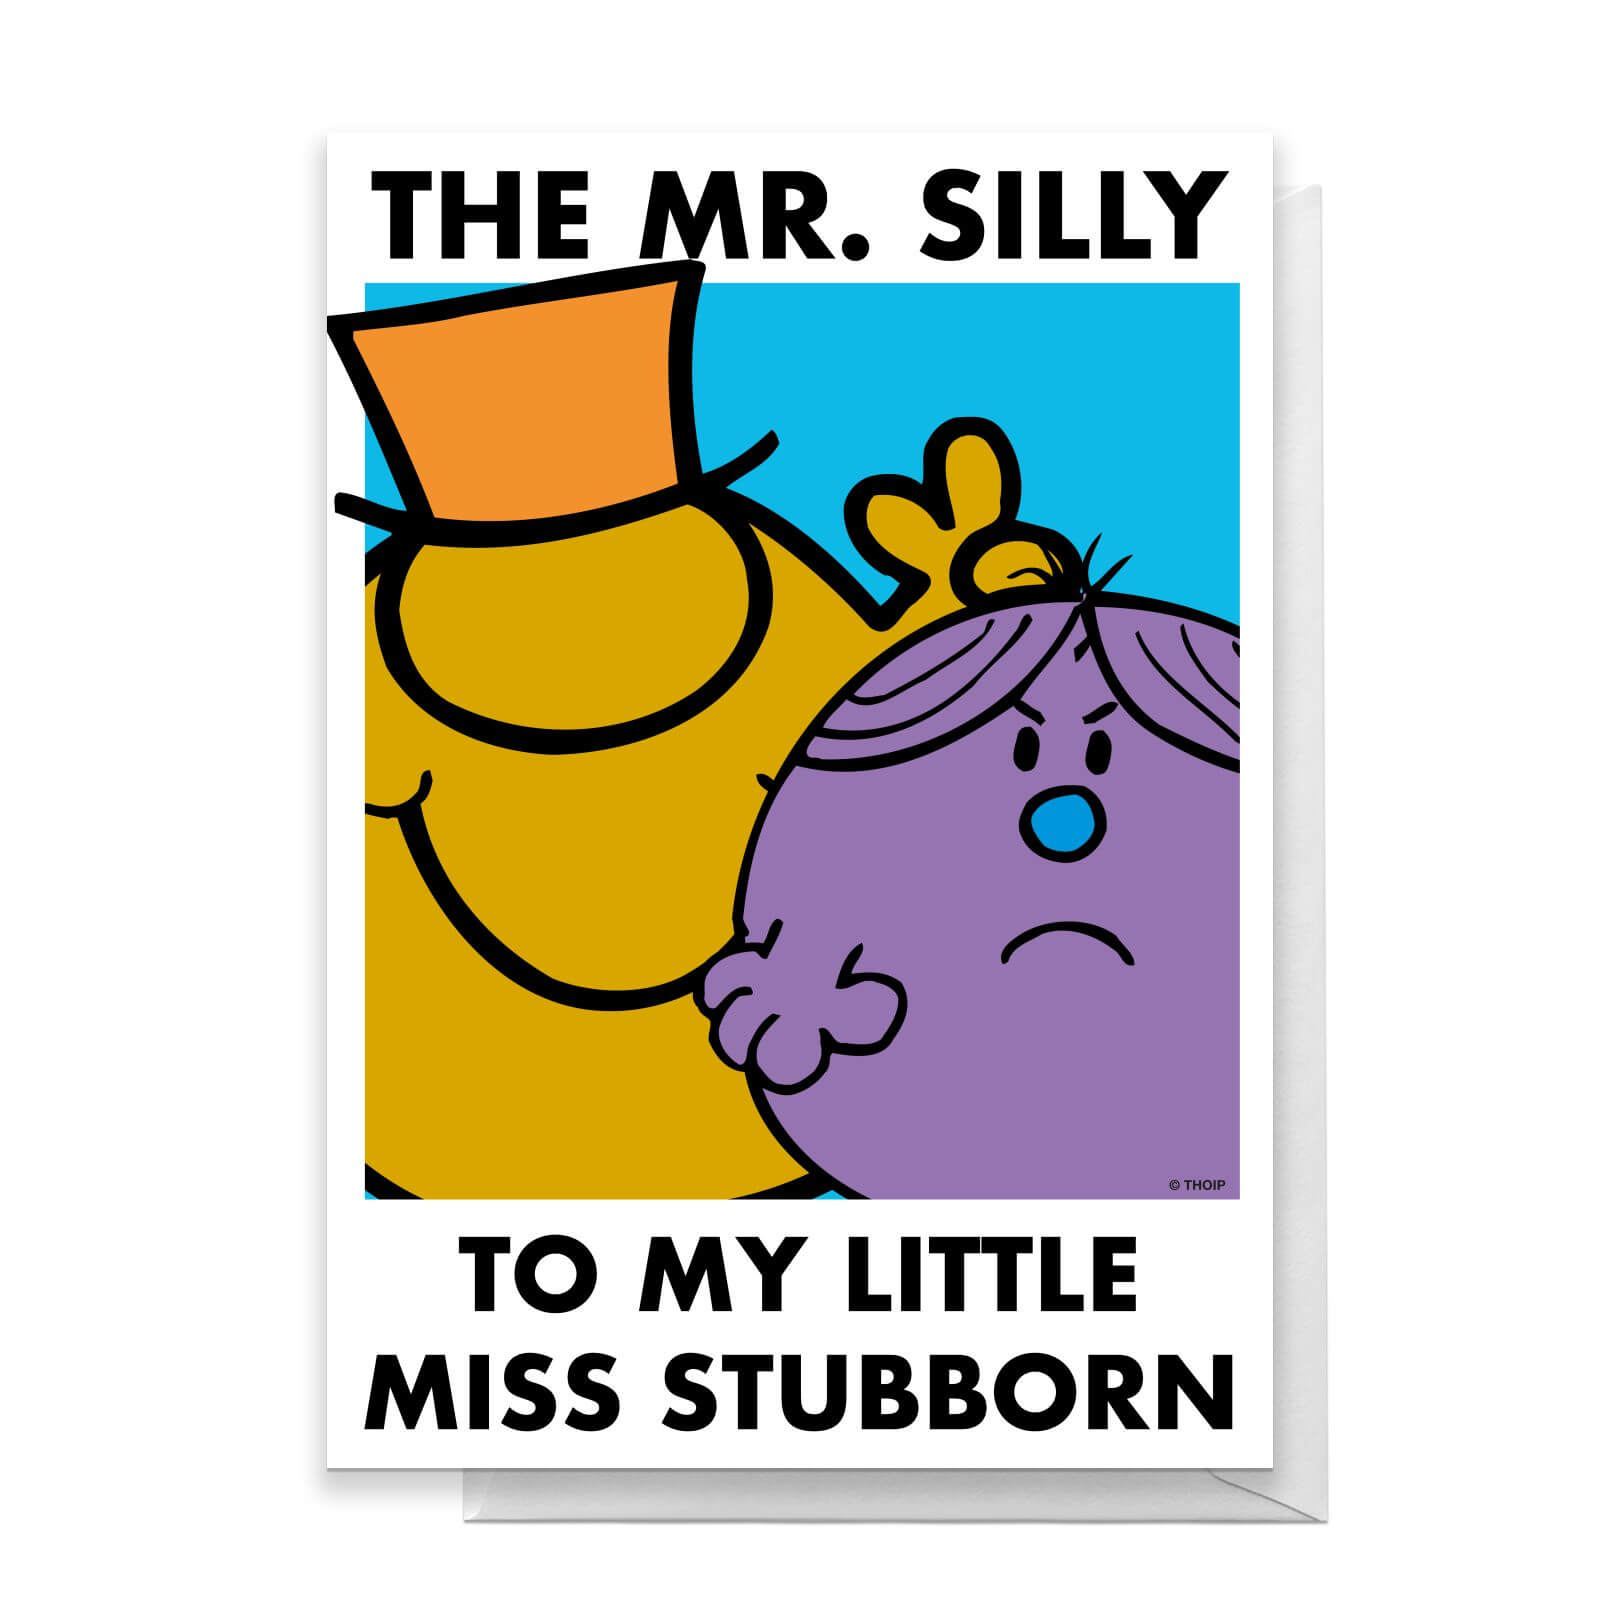 Mr Men & Little Miss The Mr. Silly To My Little Miss Stubborn Greetings Card - Standard Card